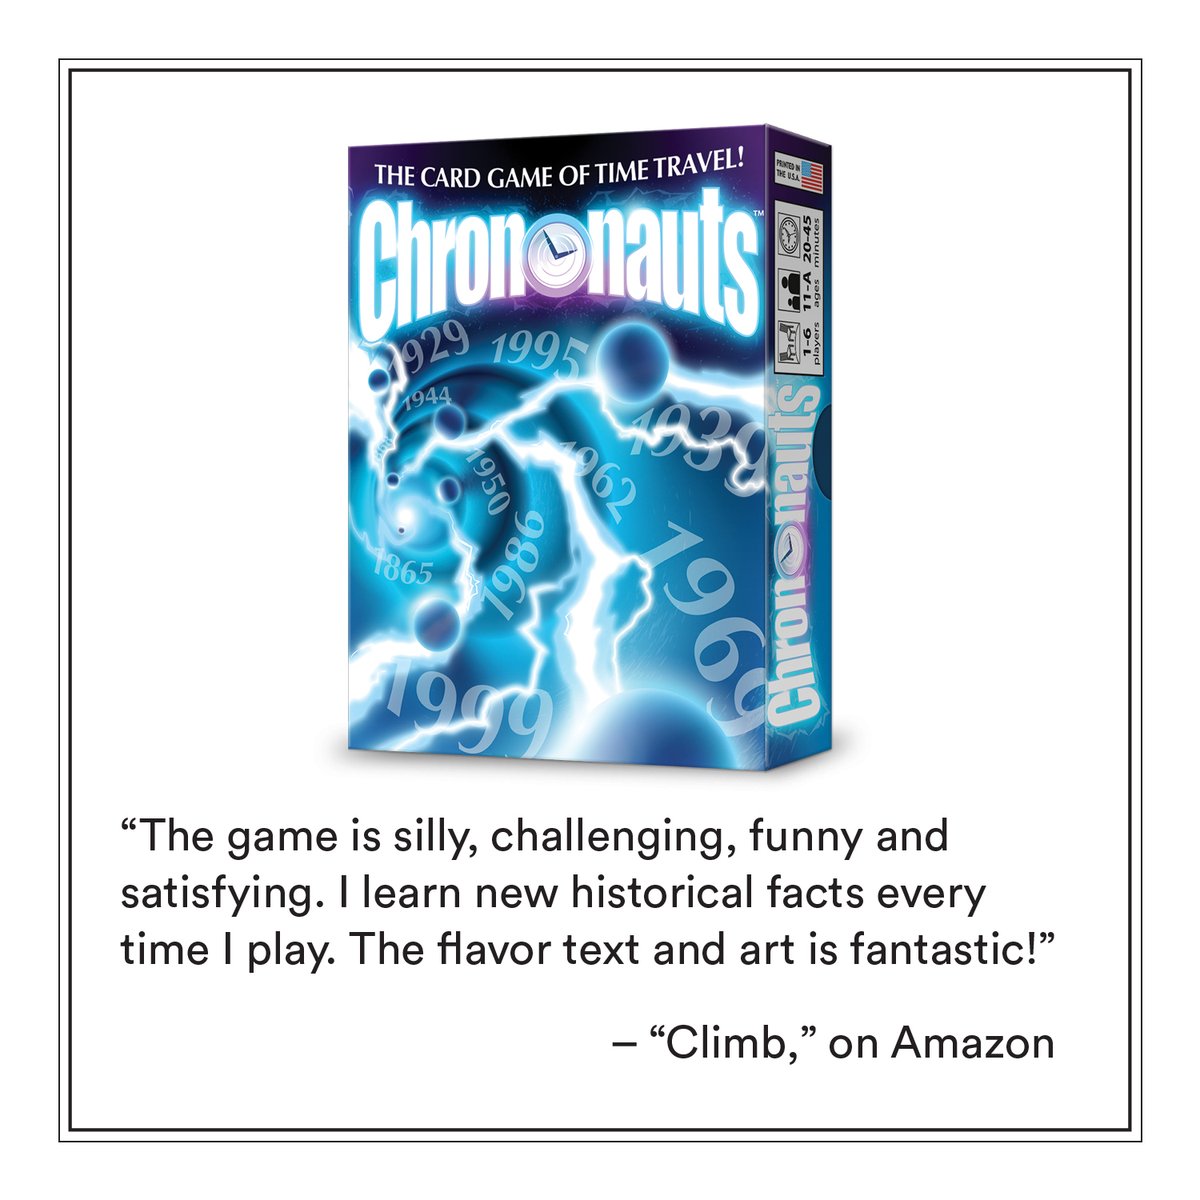 Chrononauts is a really fun & educational time travel #game! But don't just take our word for it: Climb on Amazon says, '[Chrononauts] is silly, challenging, funny, & satisfying. I learn new historical facts every time I play. The flavor text & art is fantastic!' Have you played?